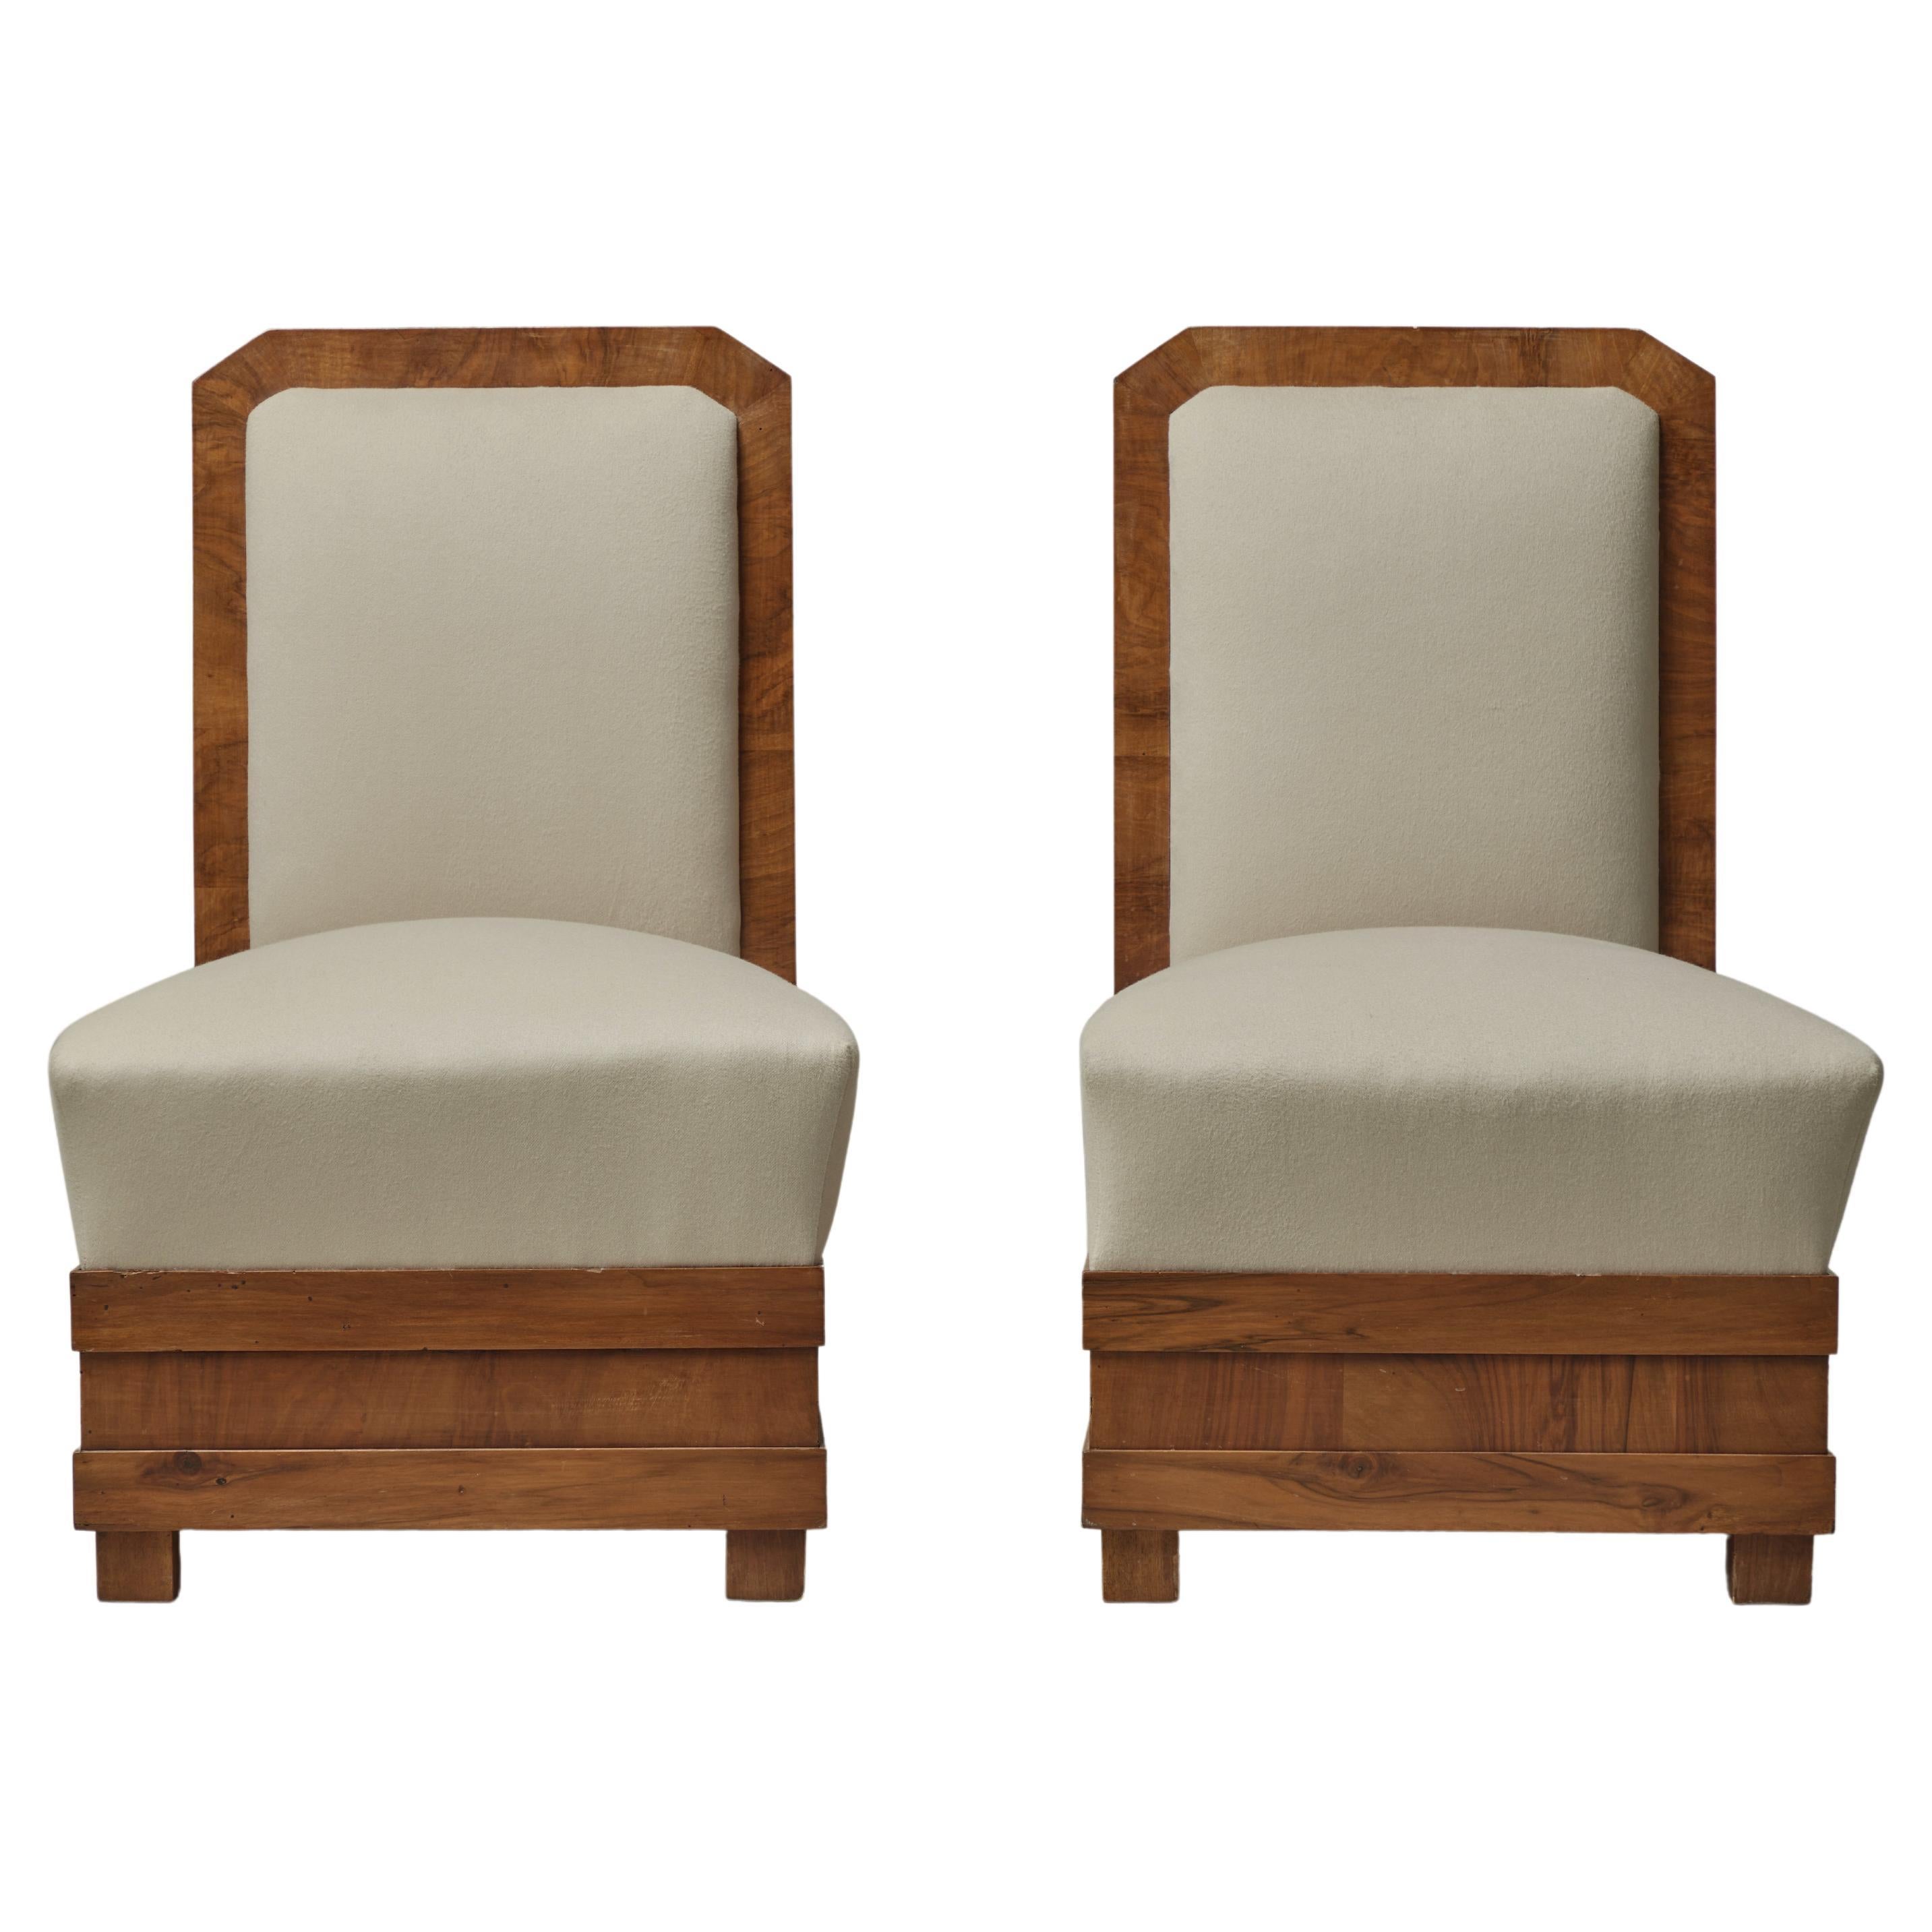 1920s Chairs